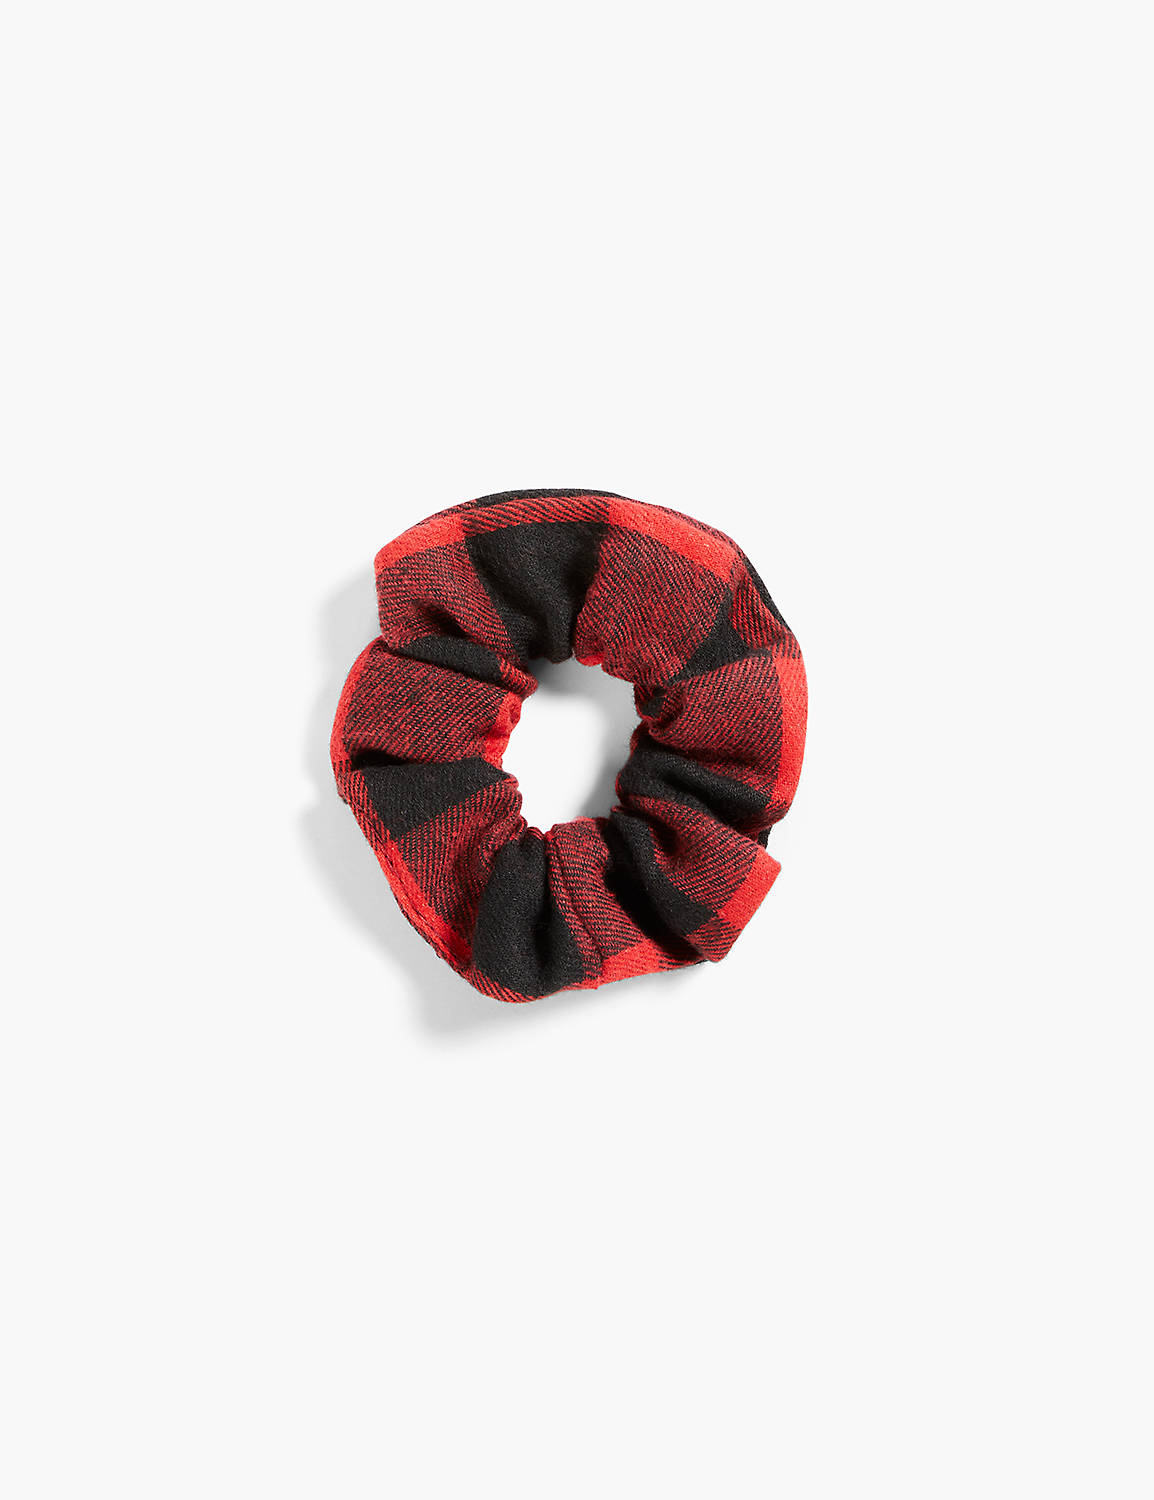 BUFFALO CHECK PRINTED SCRUNCHIE Product Image 1